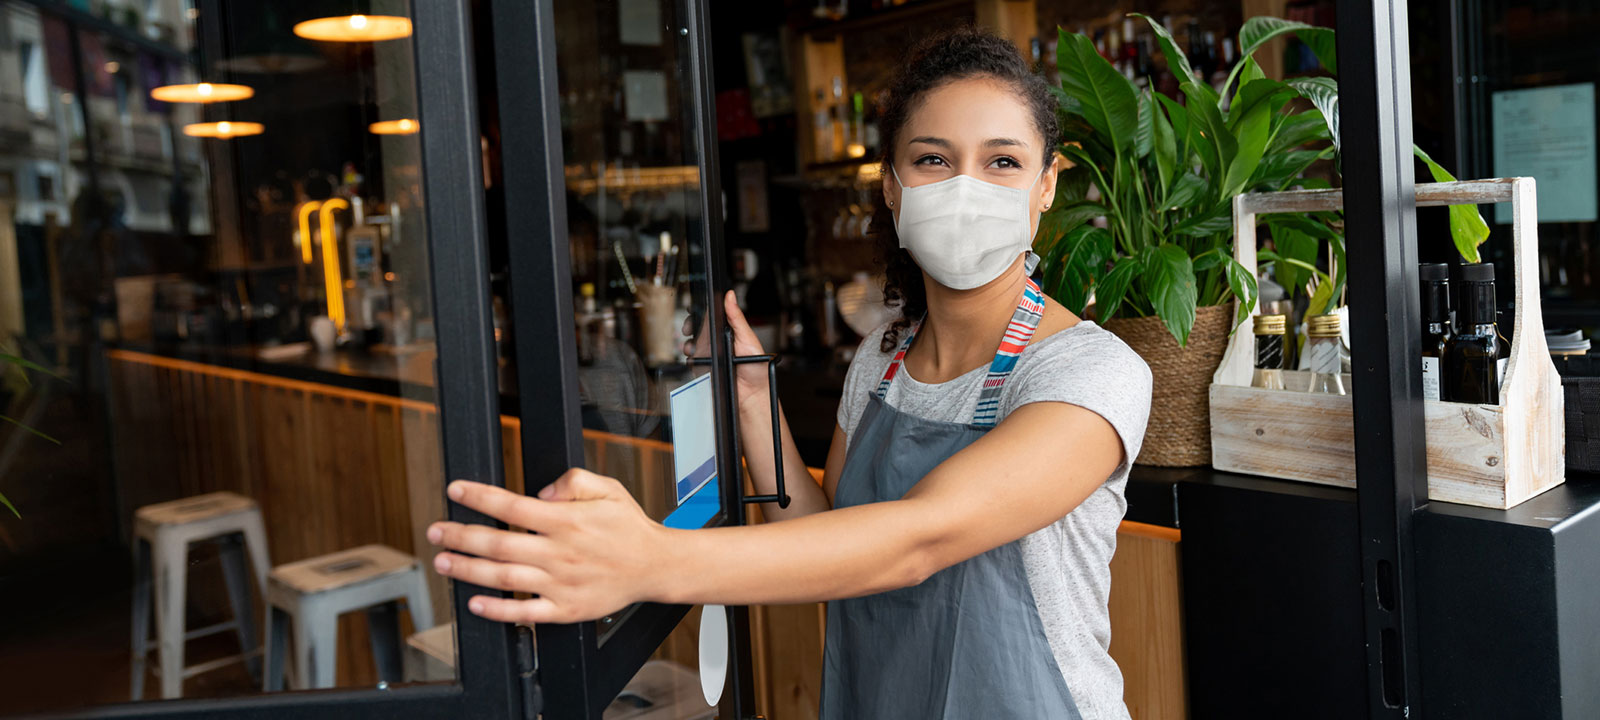 Woman wearing mask opens a cafe door